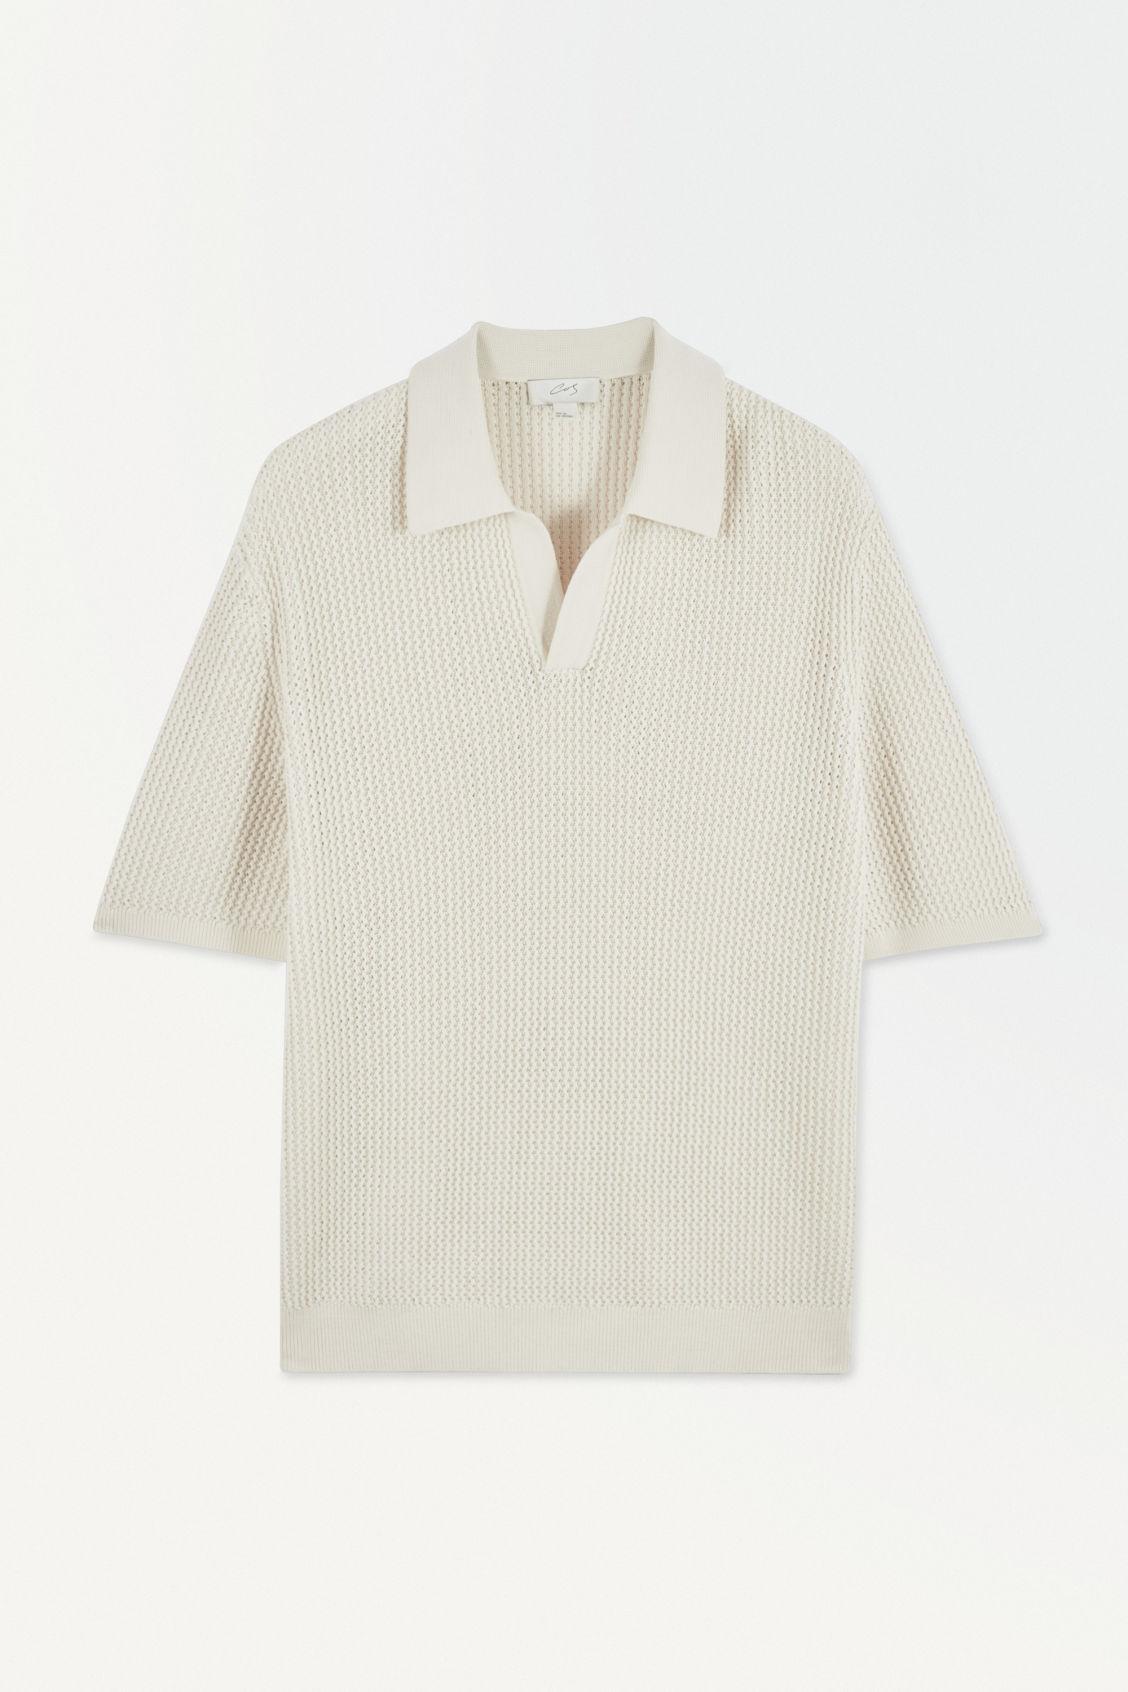 COS The Knitted Silk Polo Shirt in White for Men | Lyst